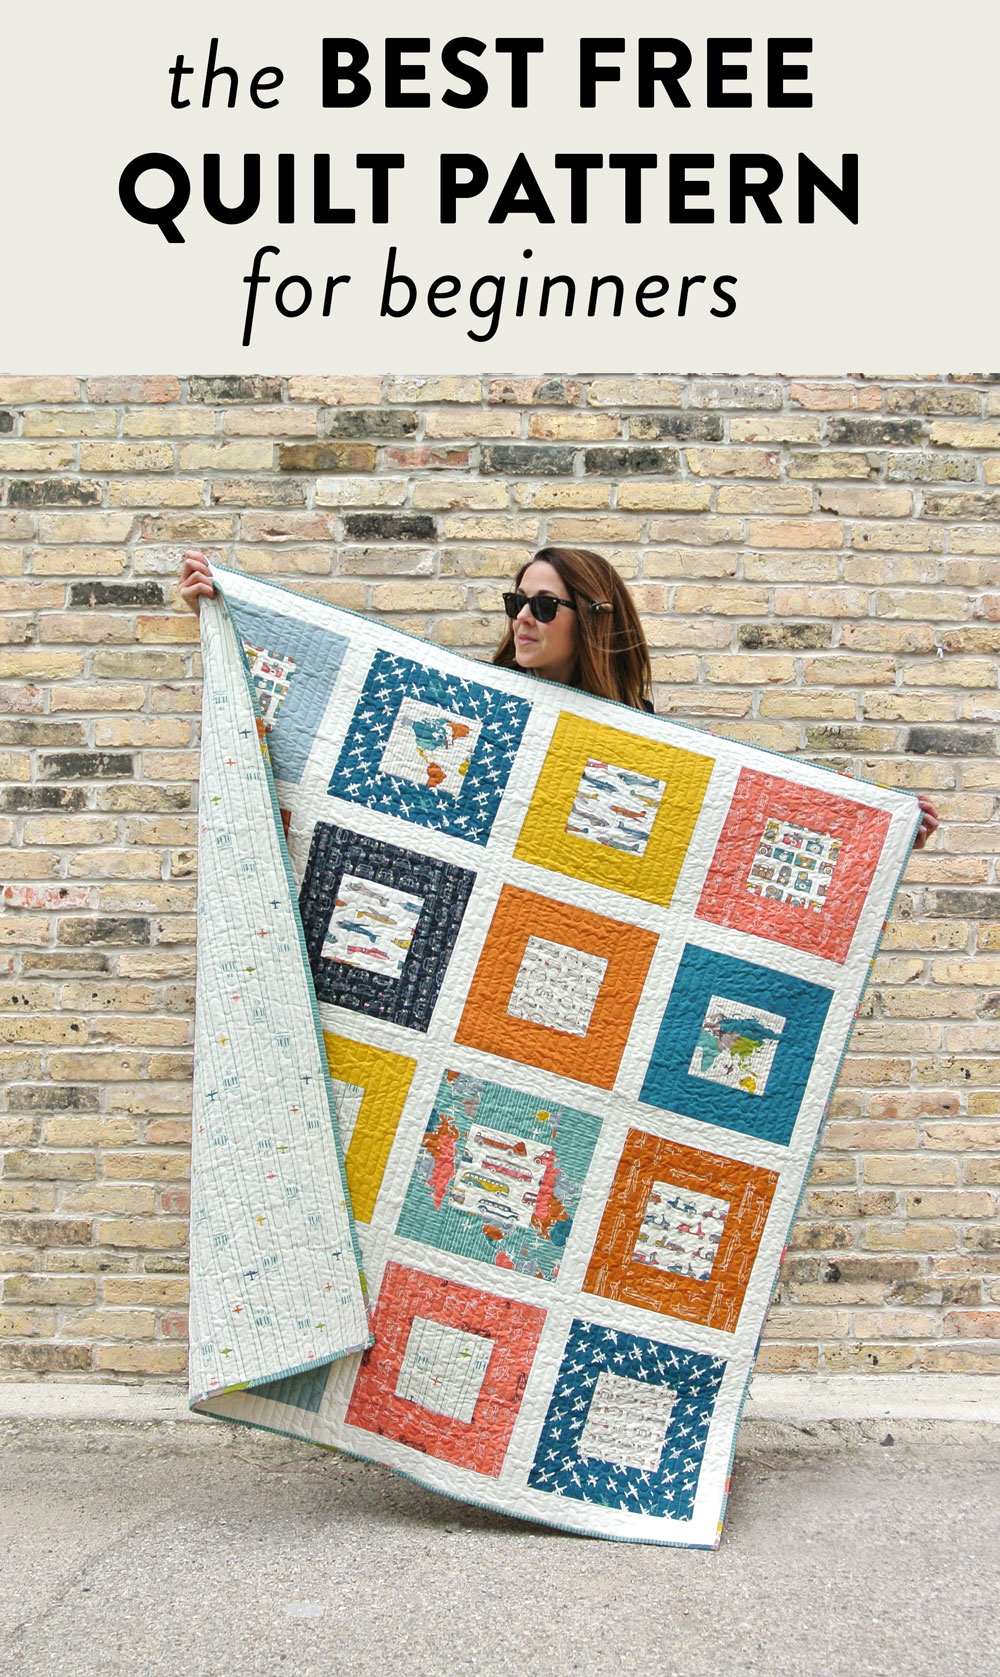 The Best Free Quilt Pattern for Beginners | Suzy Quilts https://suzyquilts.com/make-a-memory-quilt